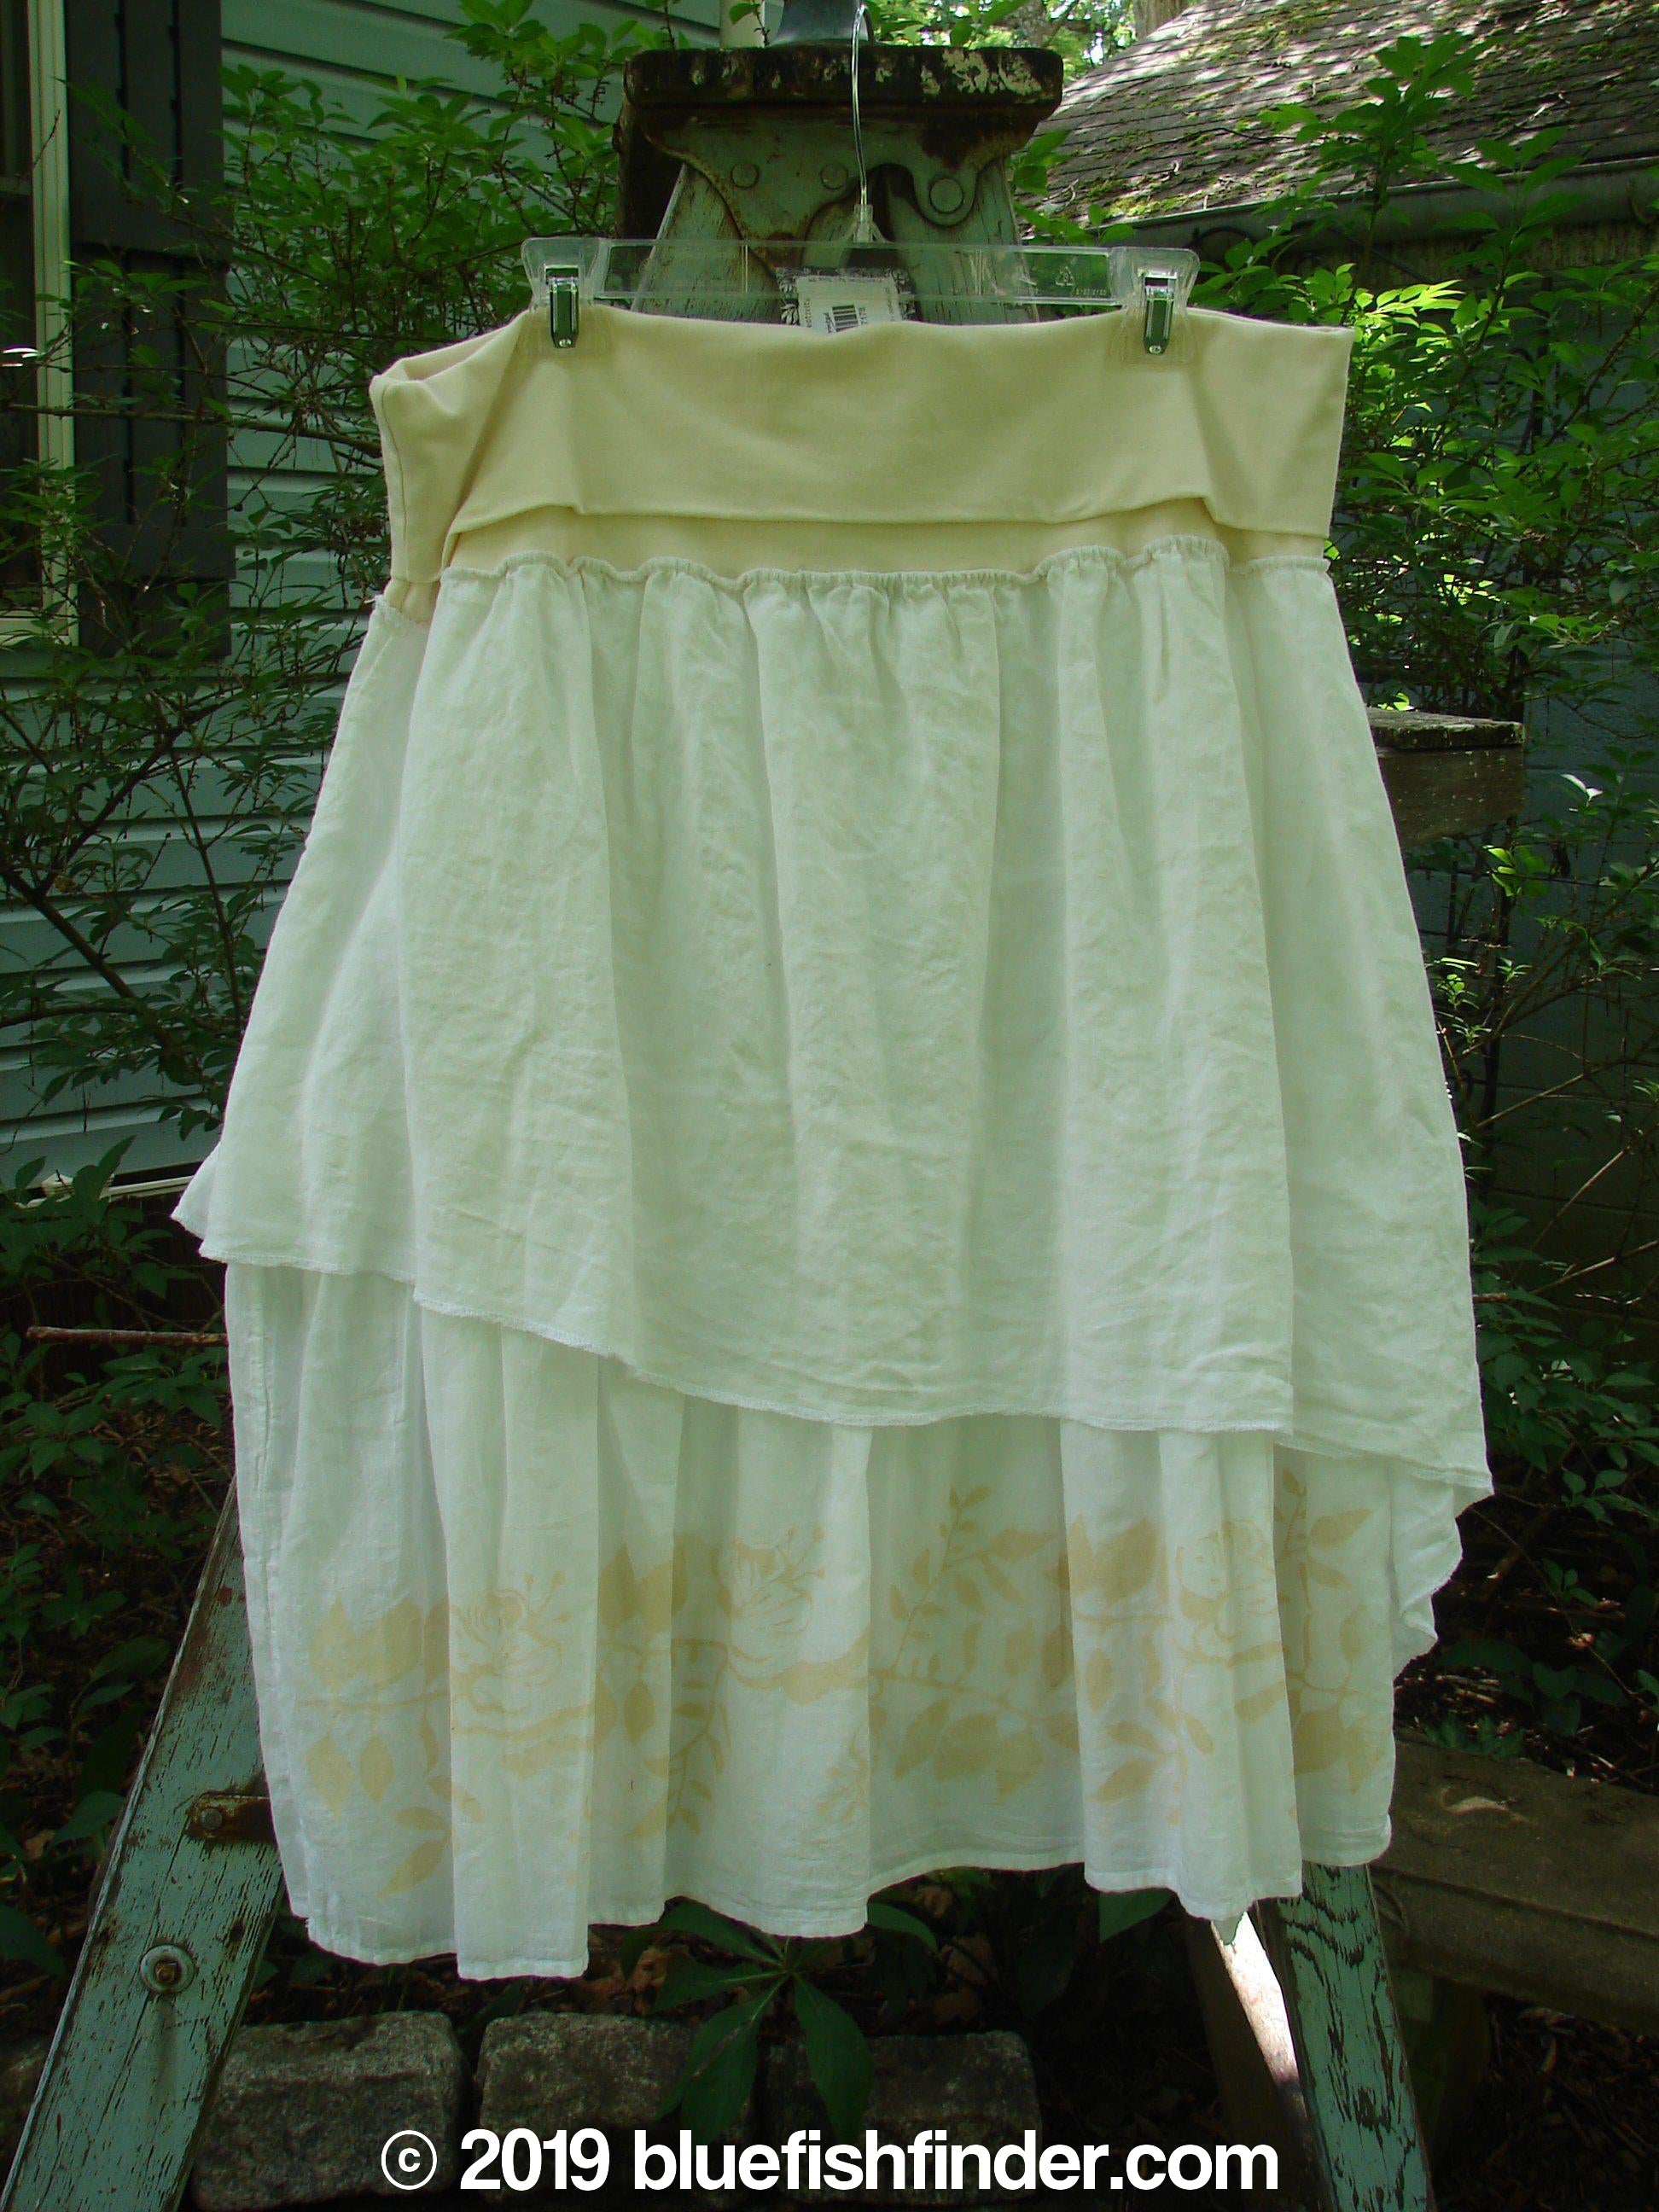 A white skirt and dress on a clothes line and rack, part of the Barclay NWT Batiste Draw Midi Meadow Trio in White. The skirt features a full cotton paneled waistline with a painted batiste outer layer and ruffled under layer. The dress has a wider, boxier crop shape with vertical pull cord accents. Perfect for spring or summer!